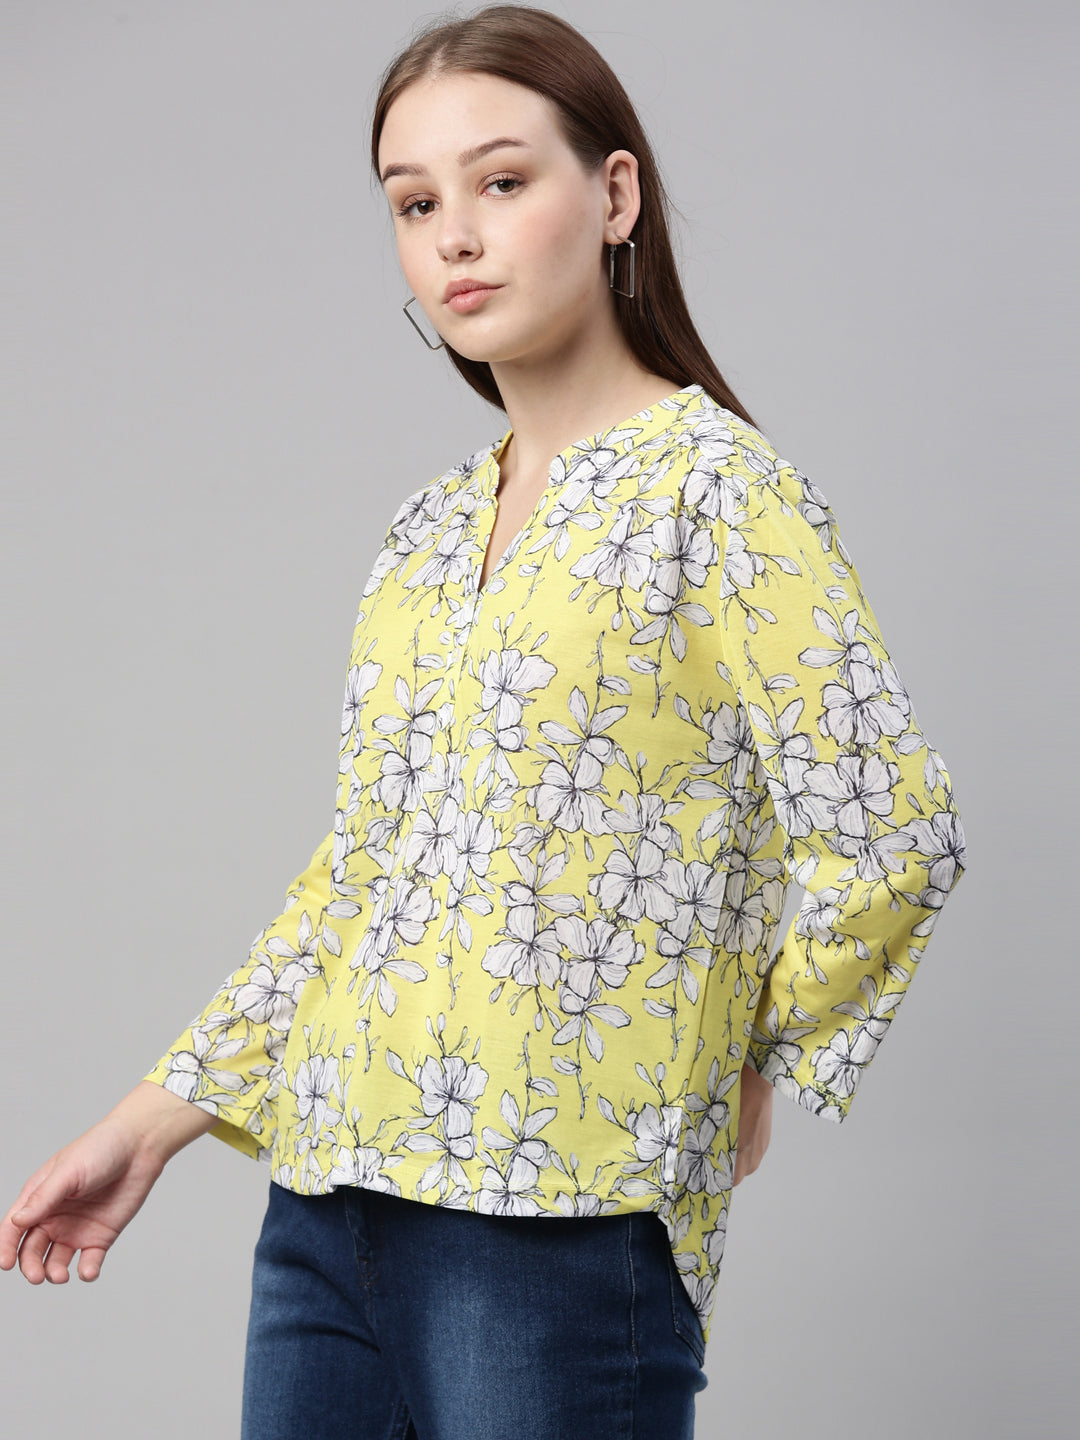 ERIKA02 (100% POLYESTER PRINT CASUAL TOPS FOR WOMENS)